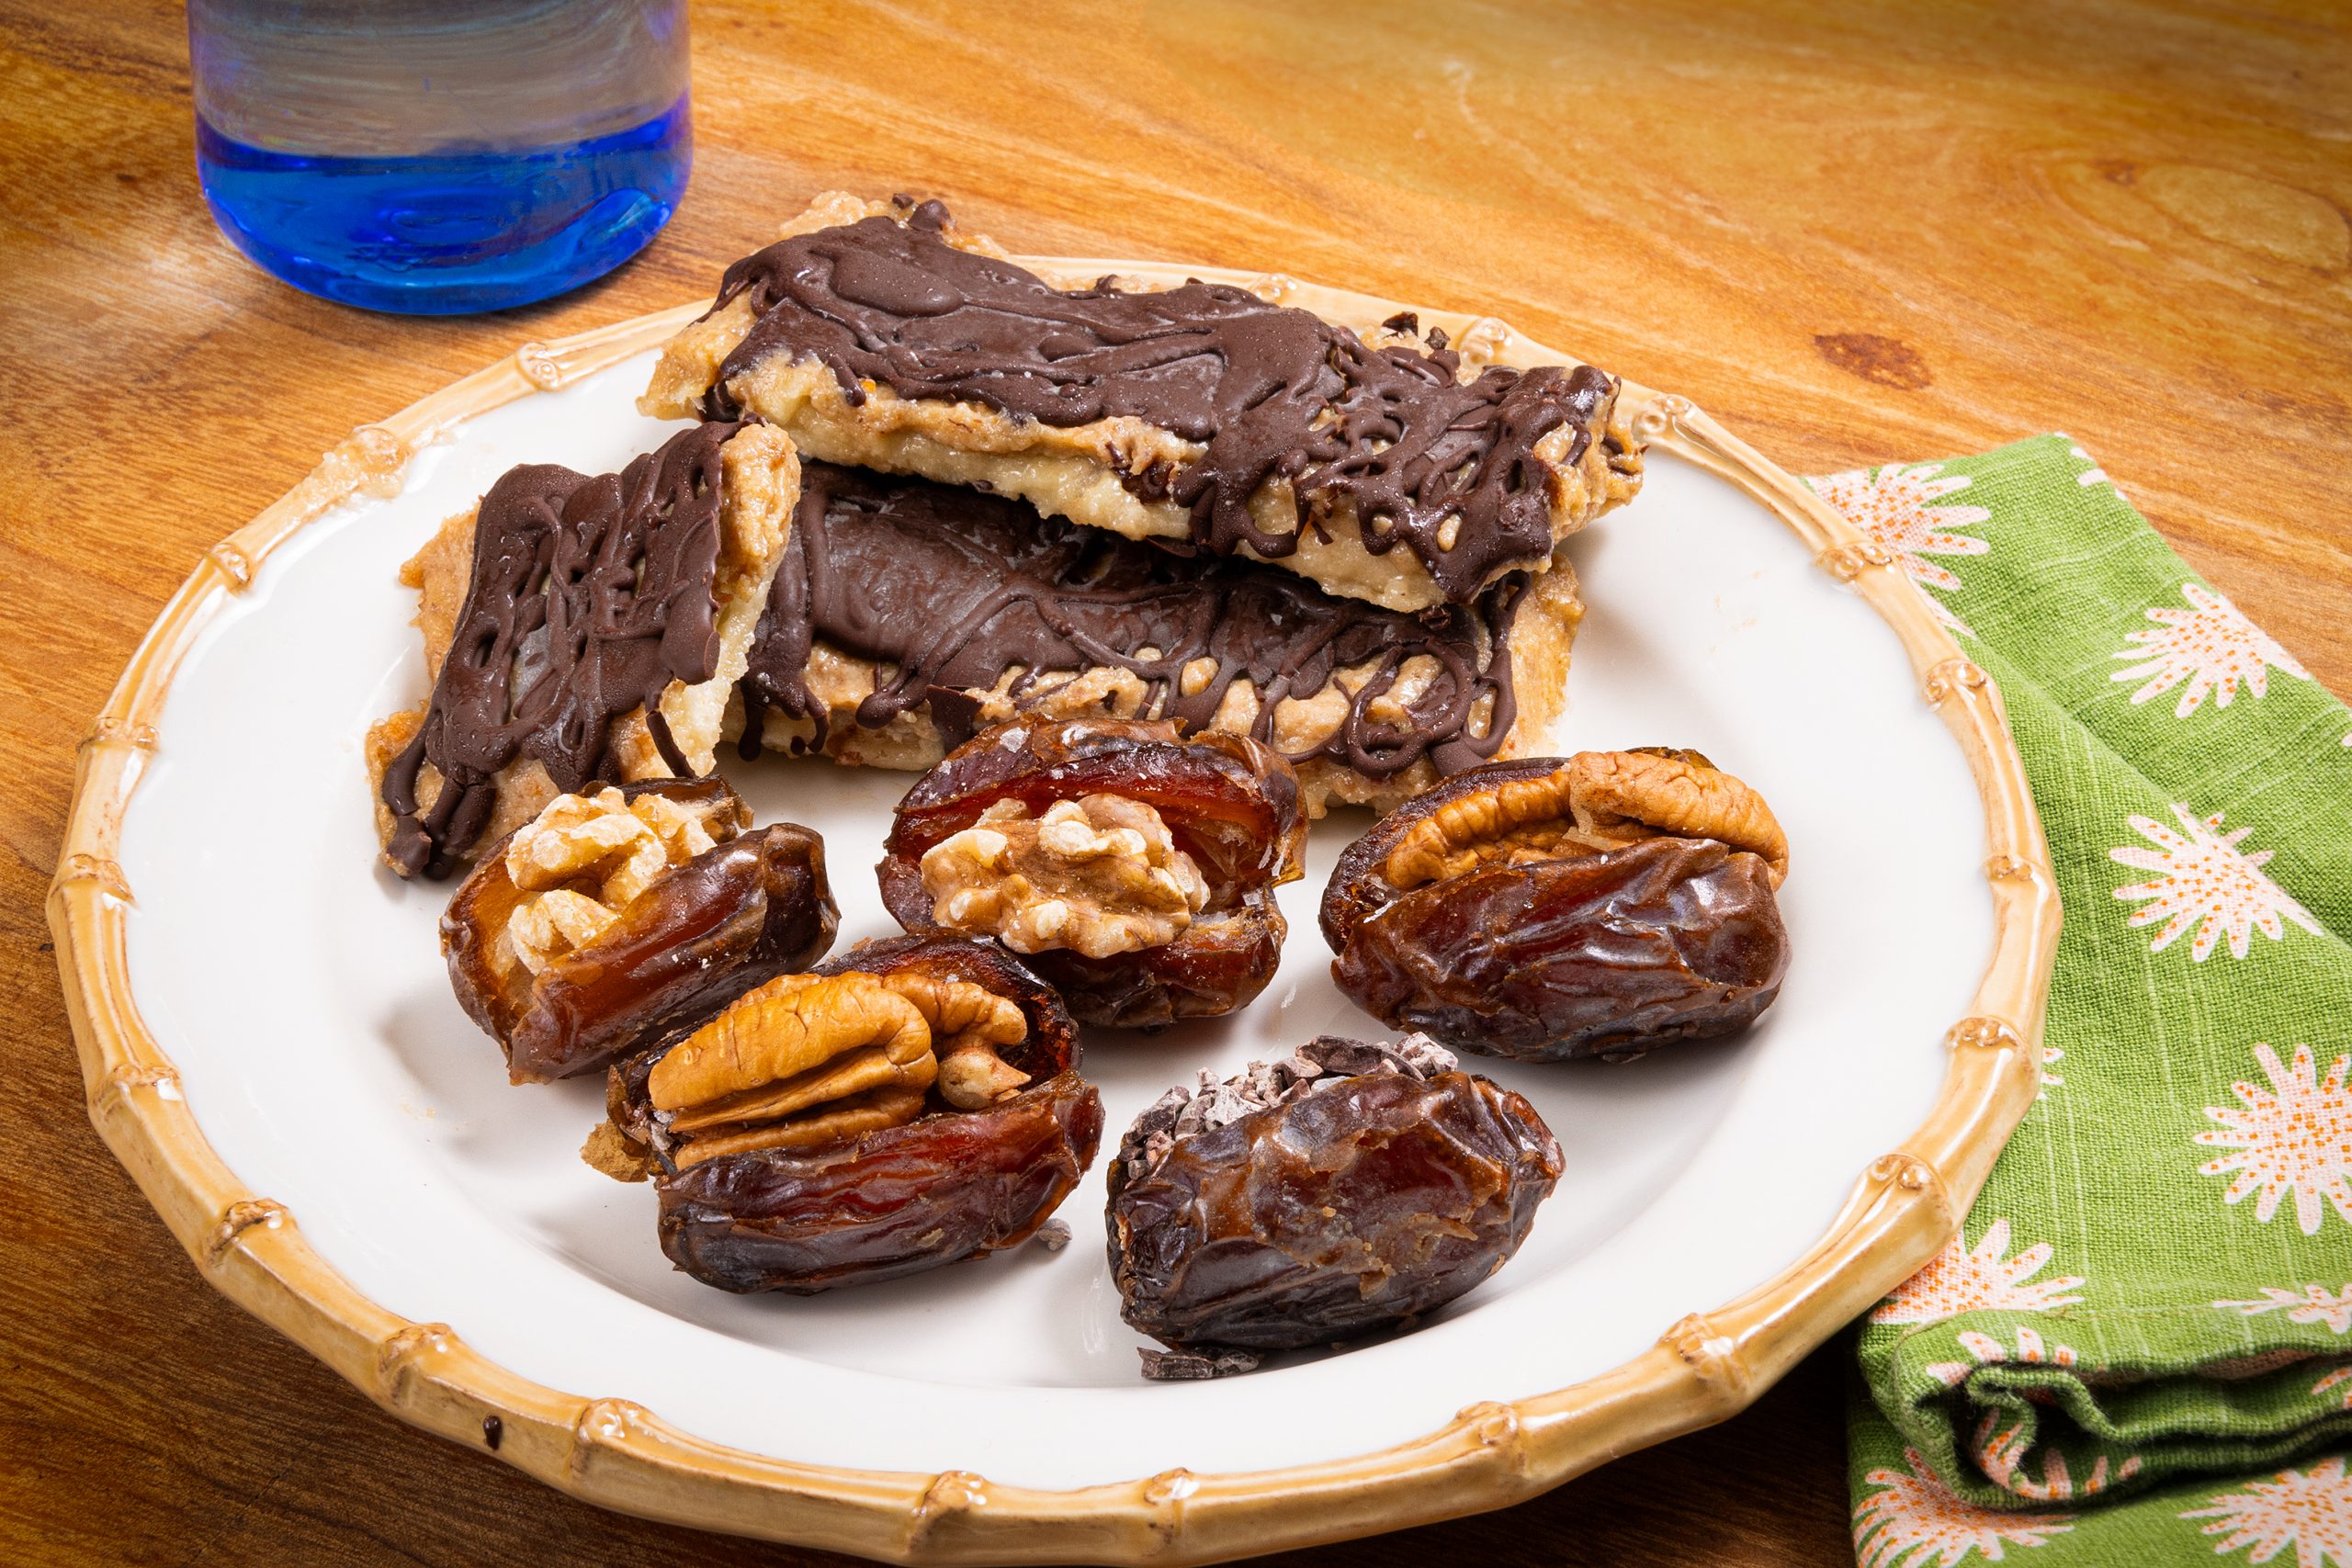 Fuel before and after you run with homemade protein bars and "a date with a nut!"